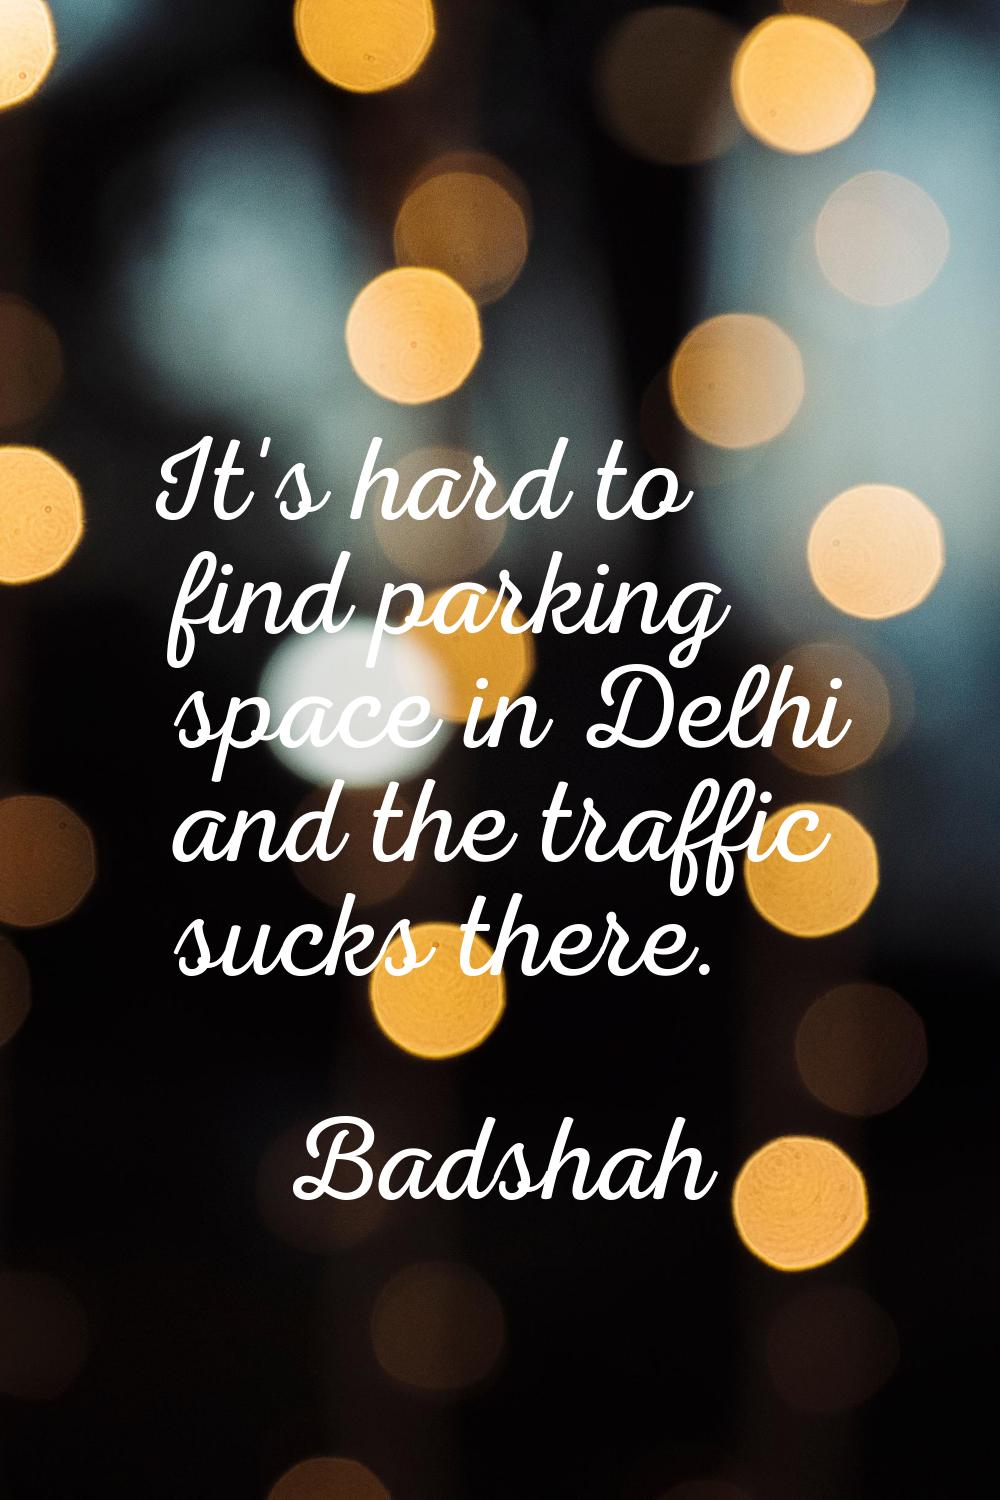 It's hard to find parking space in Delhi and the traffic sucks there.